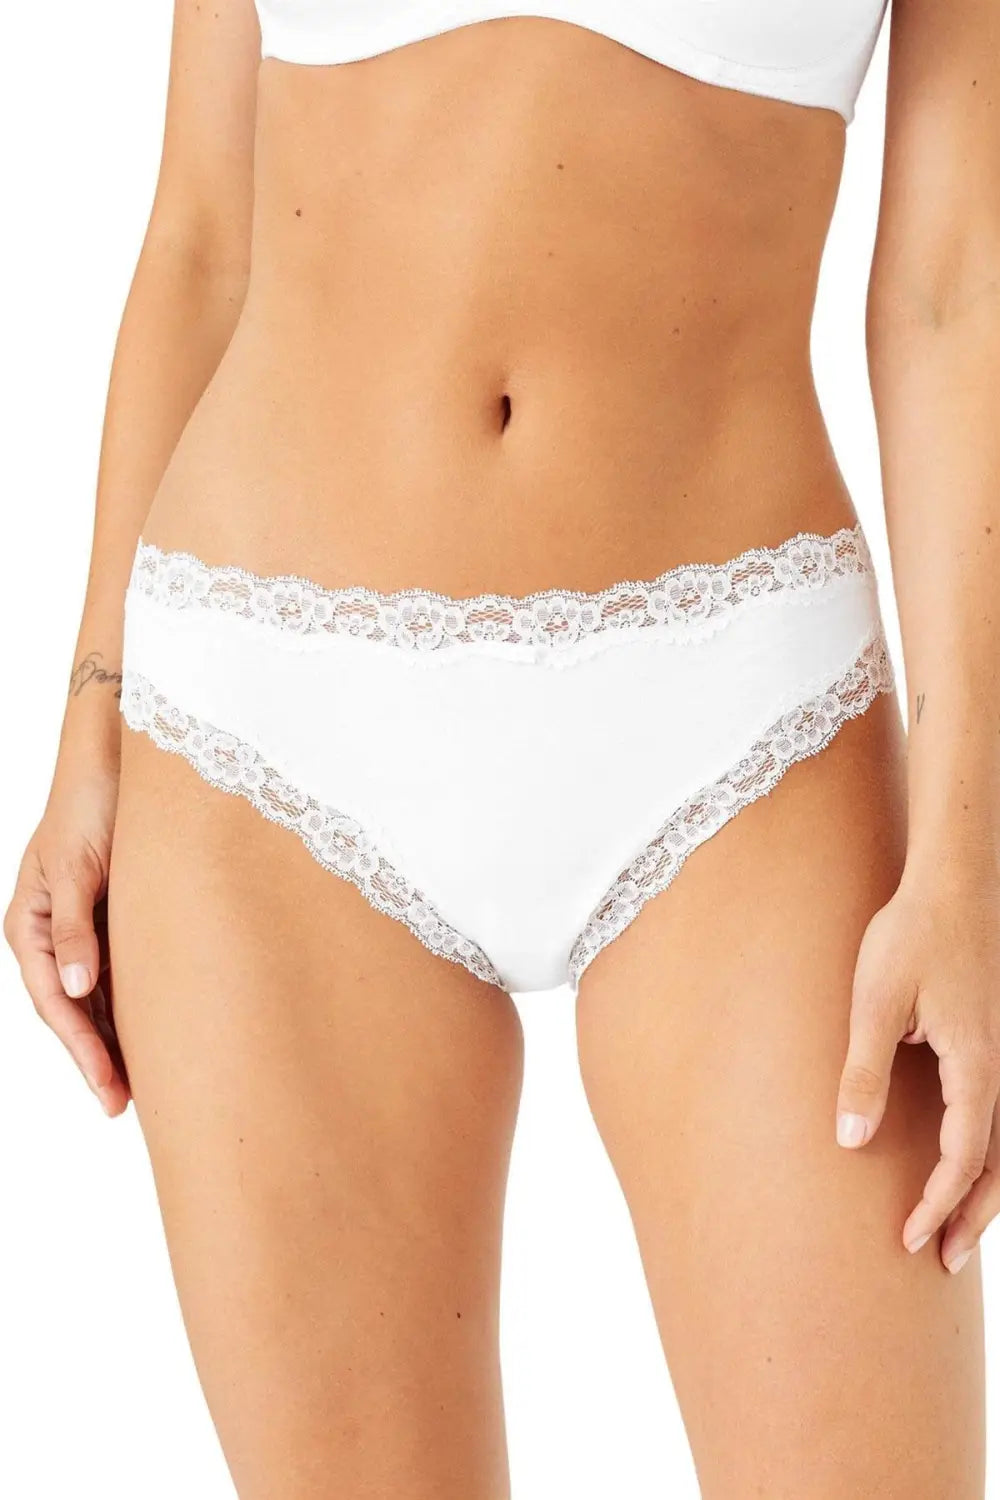 M&S Lace Knickers Black White (4 Pack)